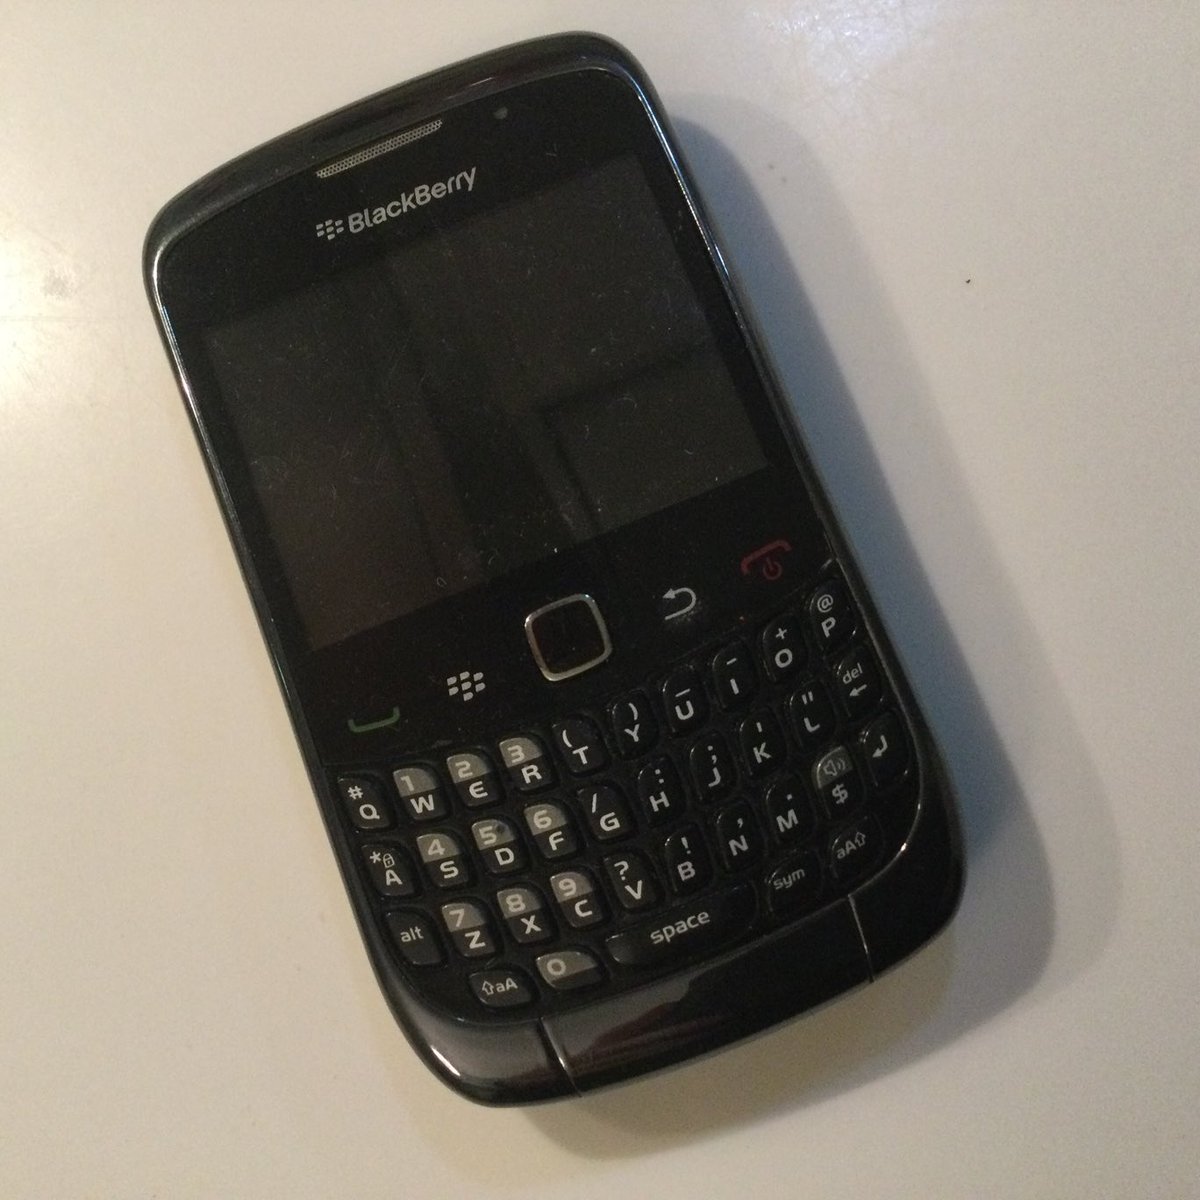 Goodbye trusty friend, your decade of service has been much appreciated. How I will miss typing accurately with my thumbs……